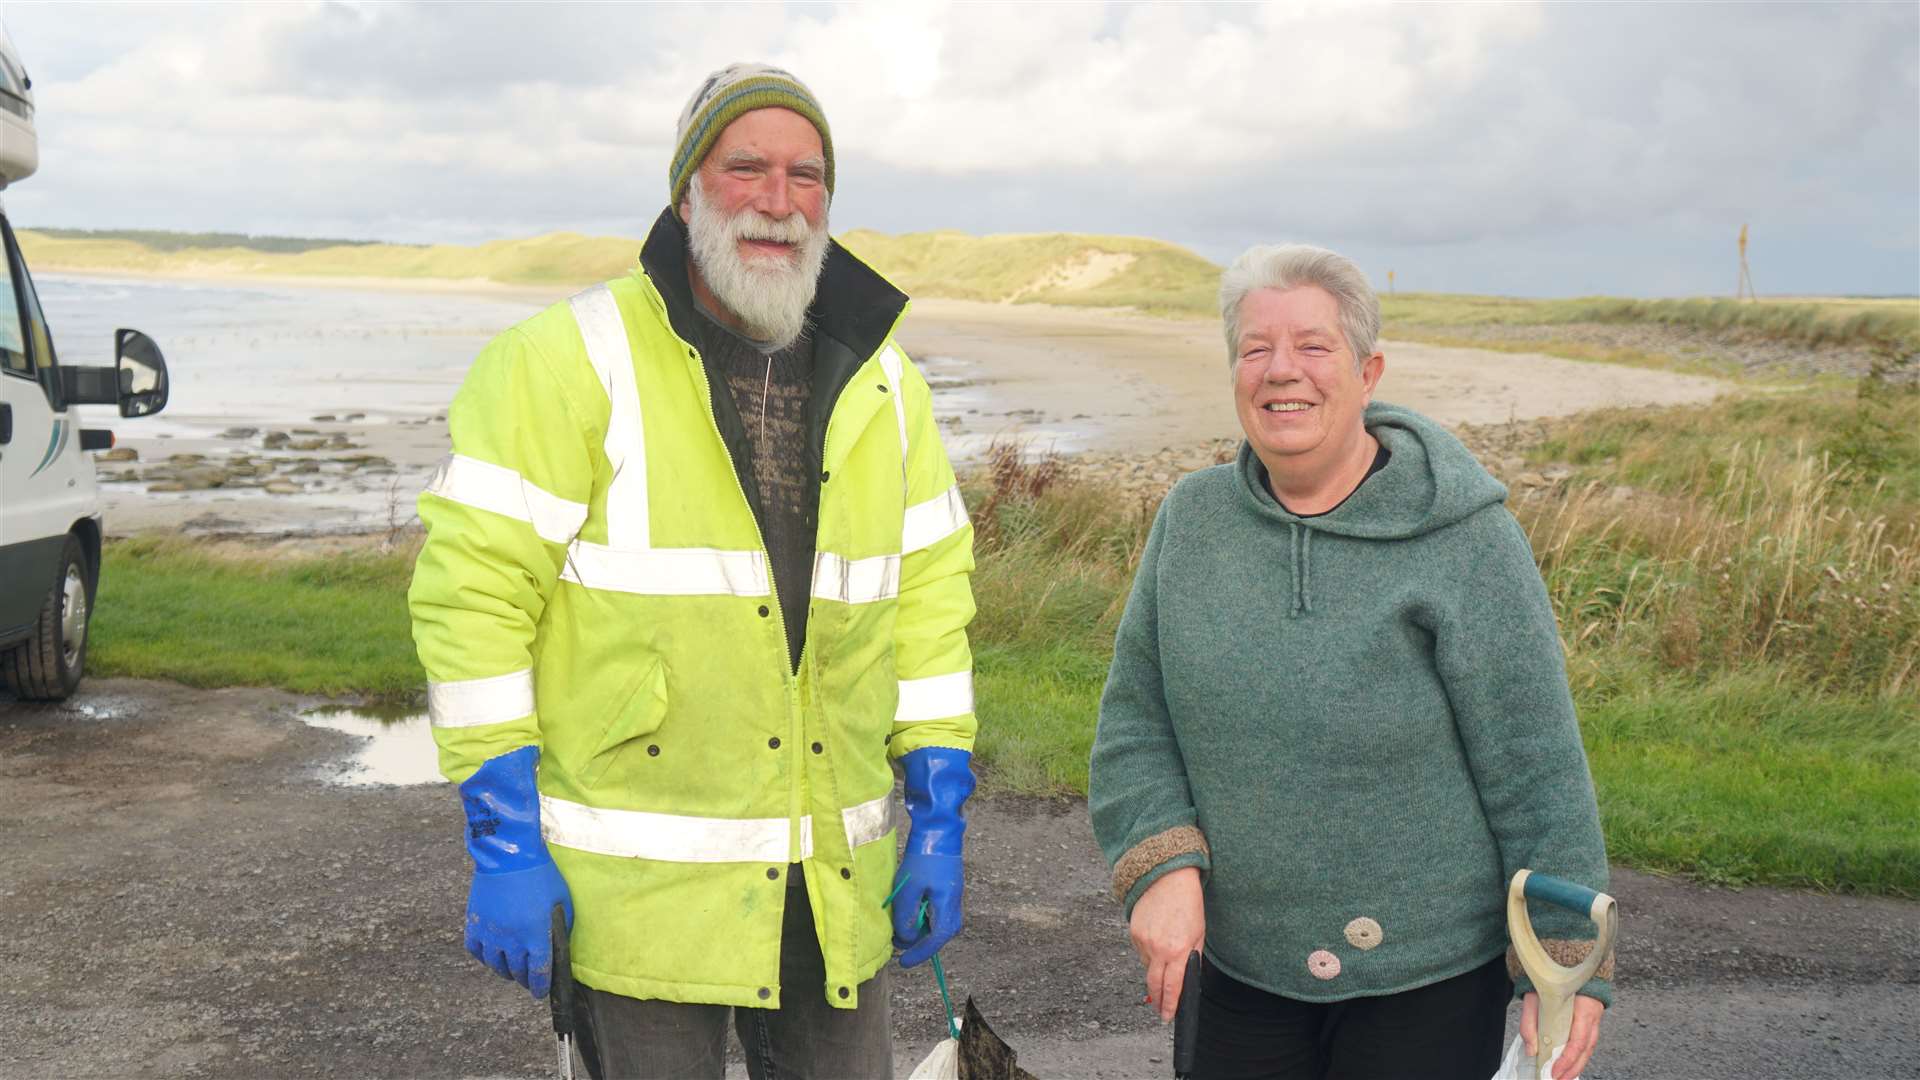 Dorcas and Allan Sinclair started Caithness Beach Cleans, a group which has cleared tons of plastic from local shorelines. Picture: DGS